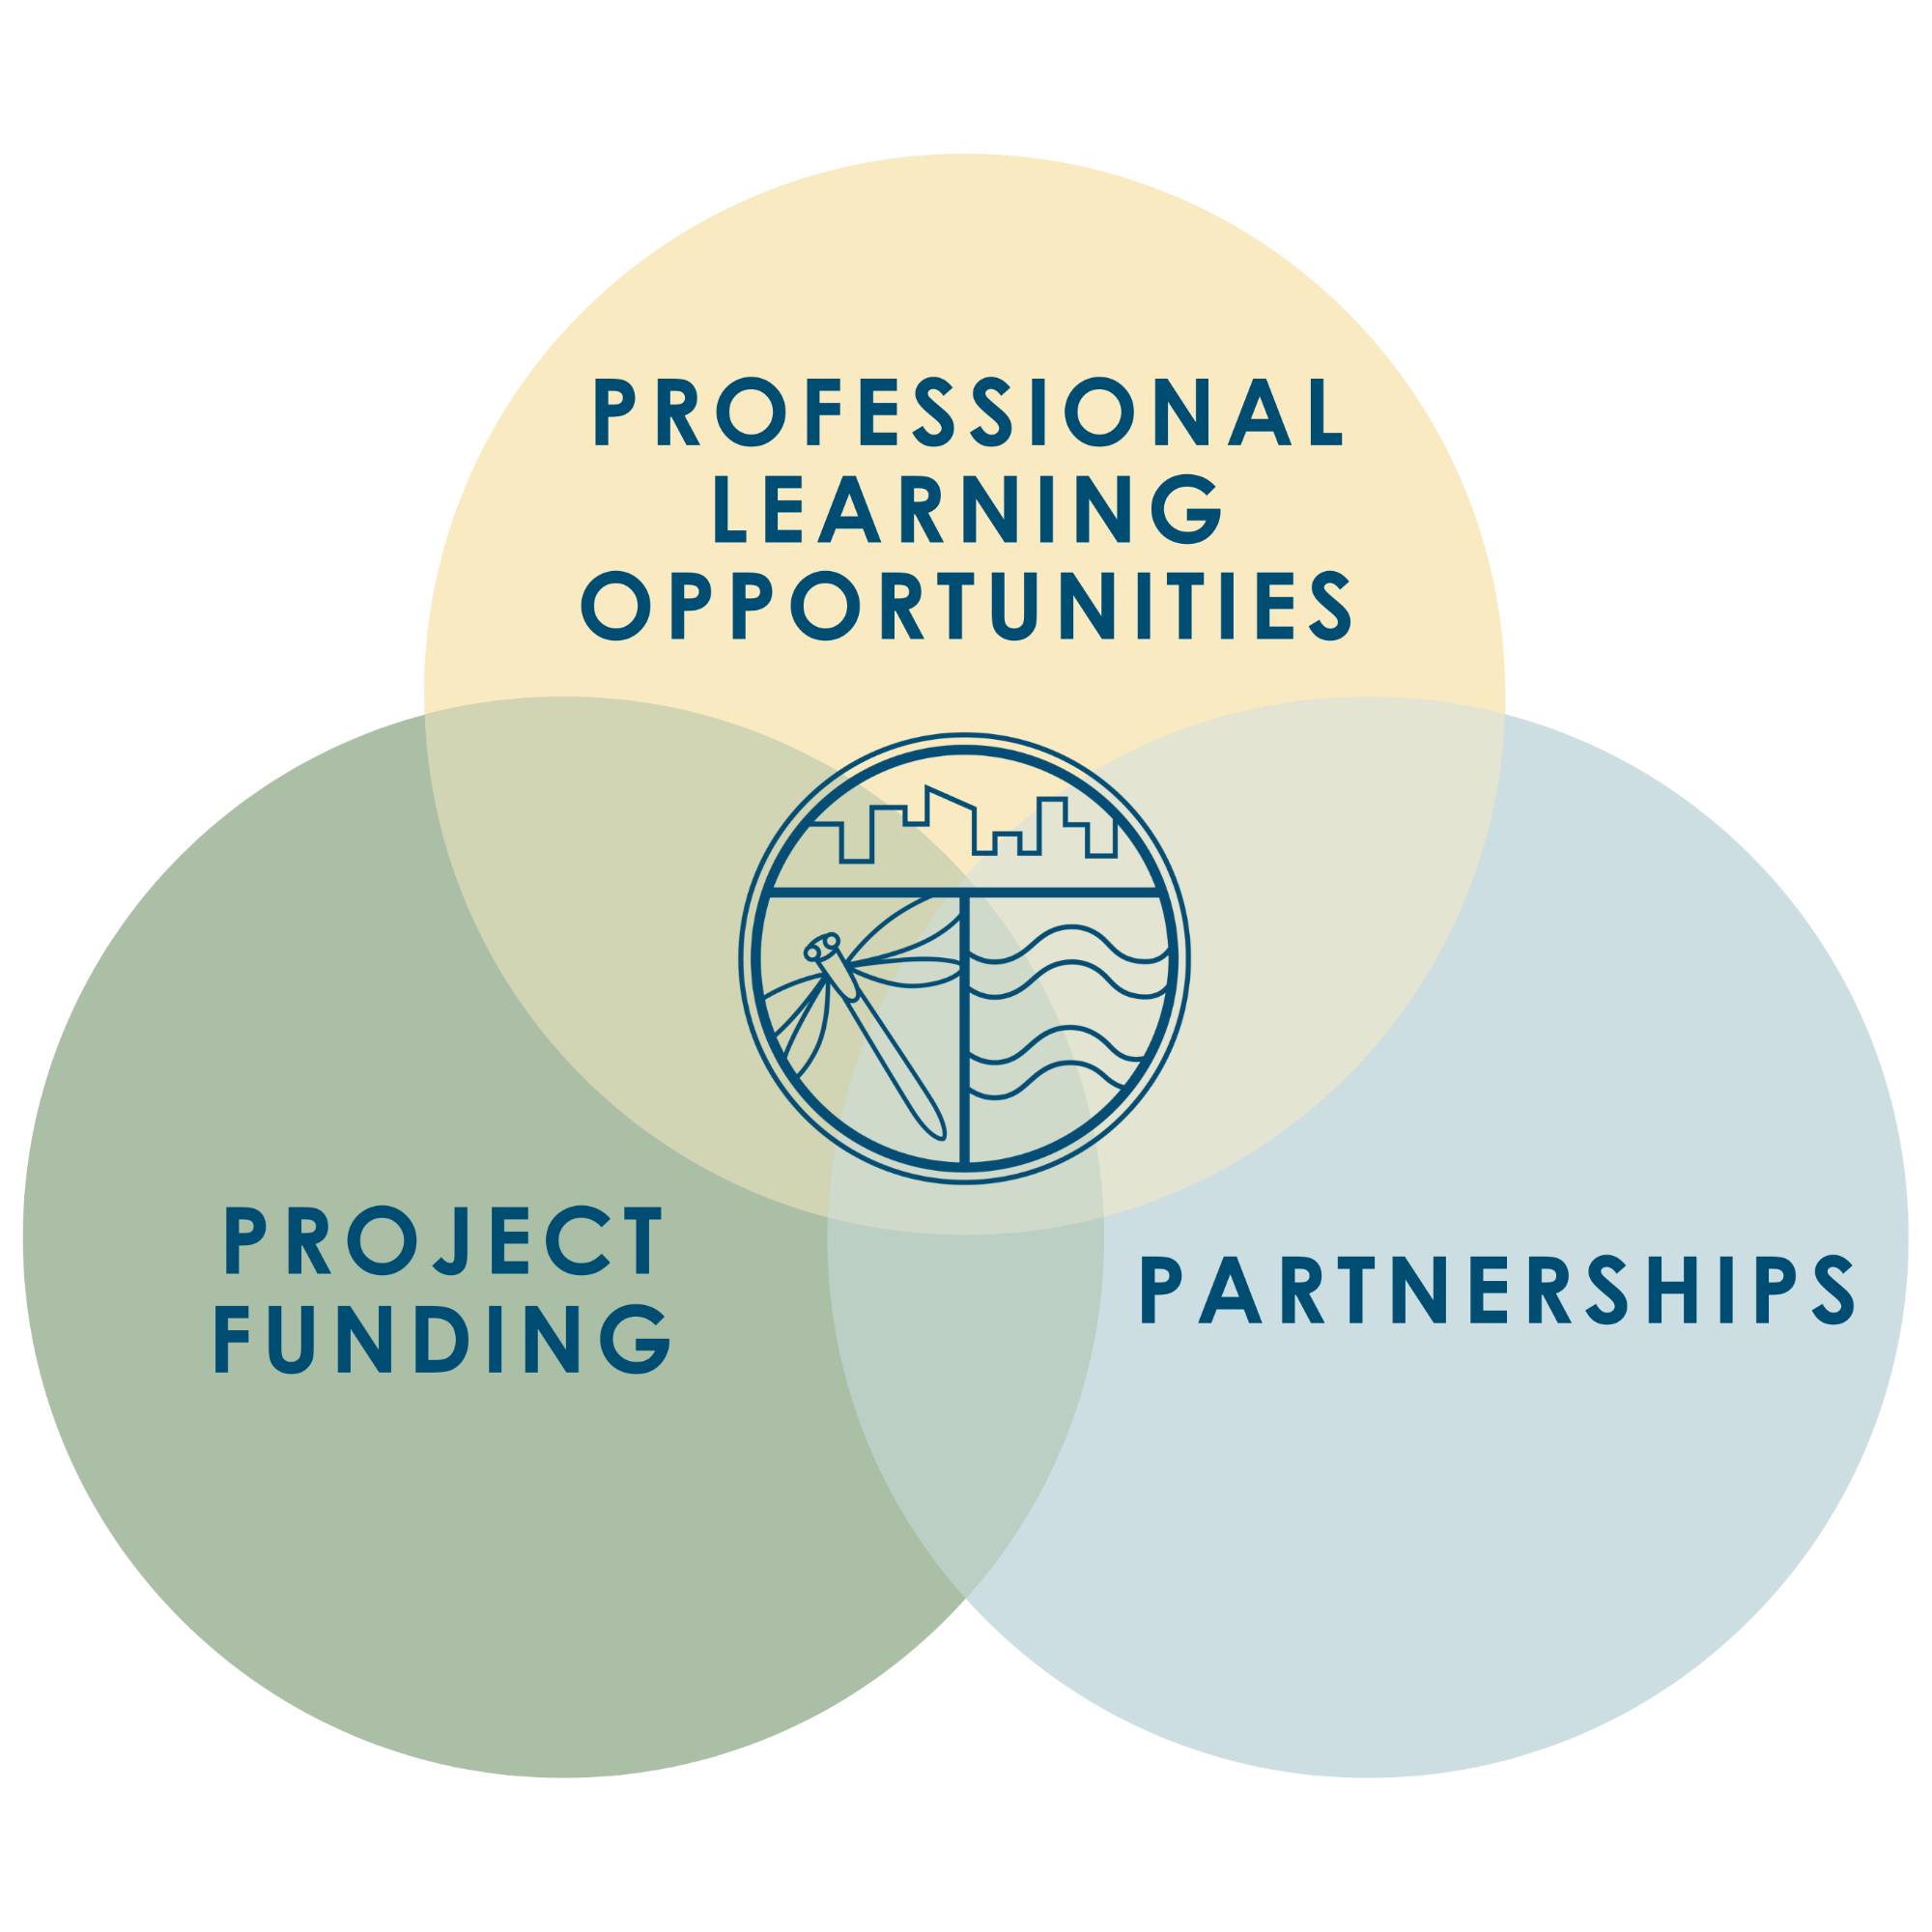 Triple Venn Diagram with Professional Learning Opportunities, Project Funding, and Partnerships